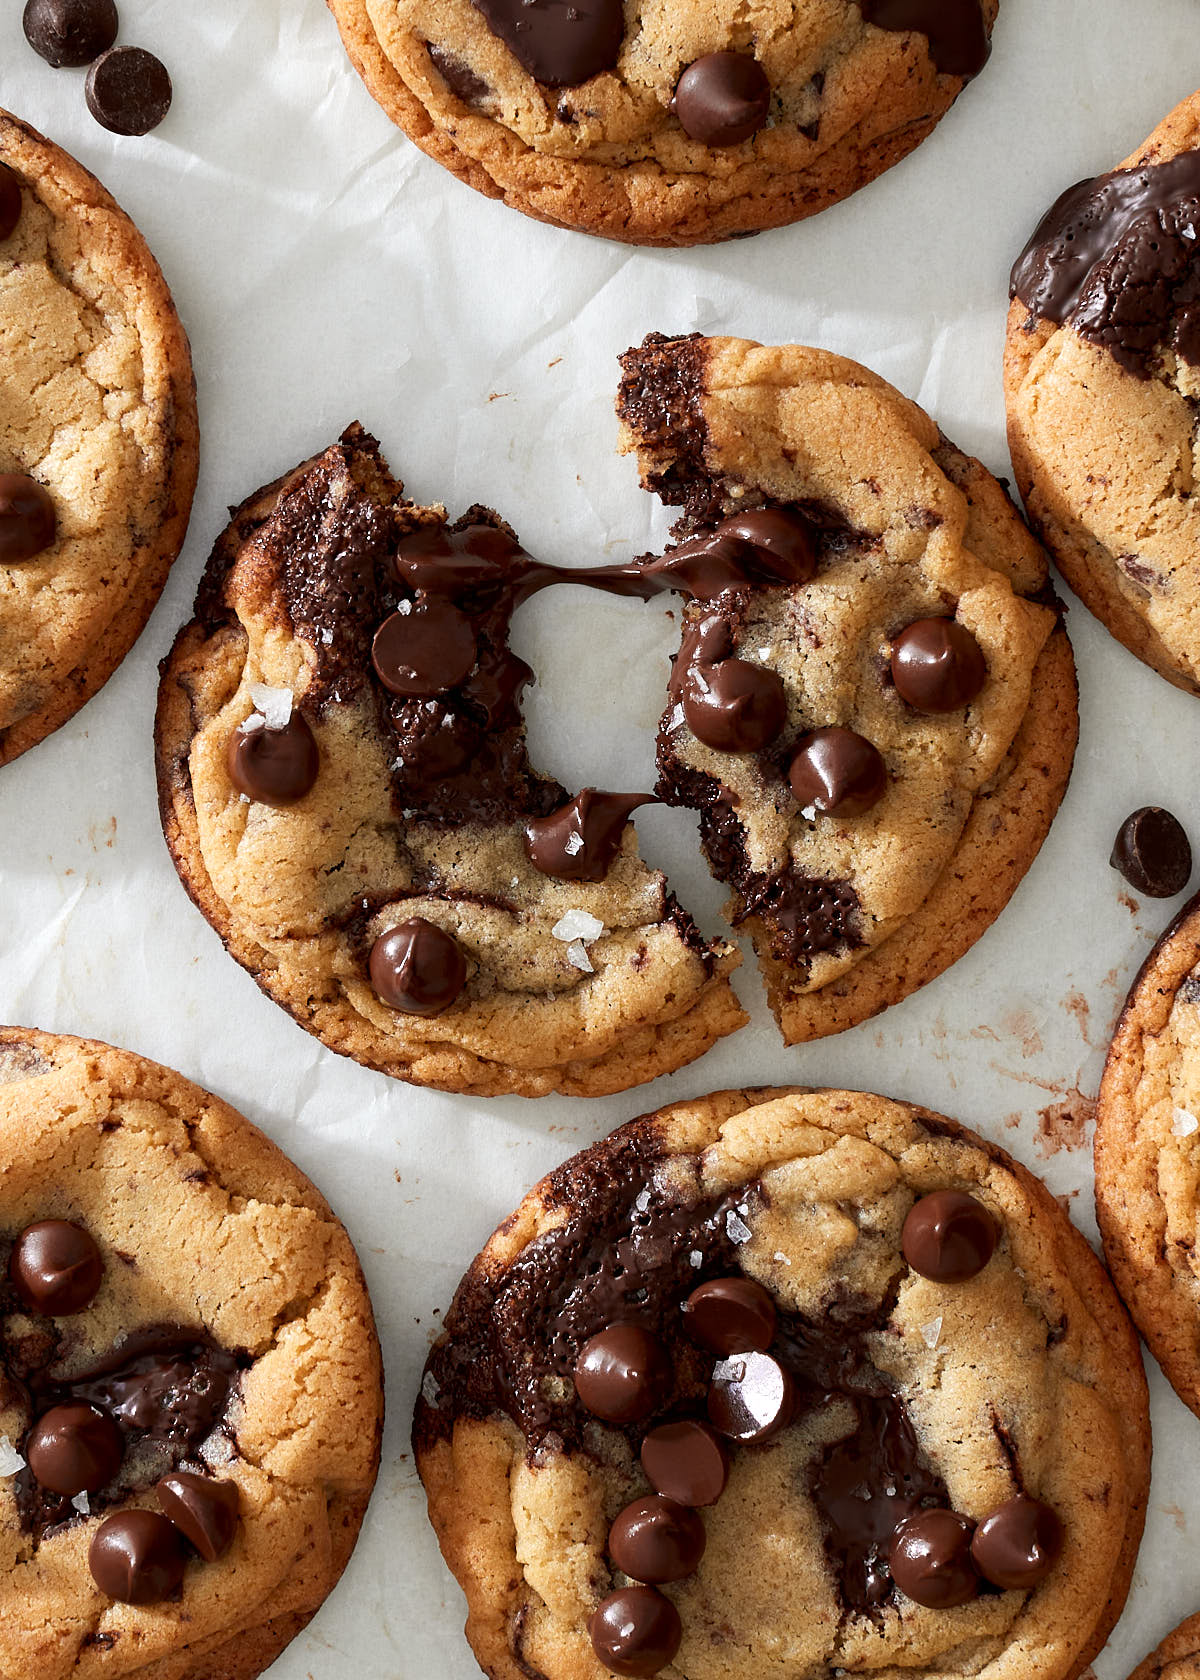 A closeup of warm and gooey chocolate chip cookies, fresh from the oven.